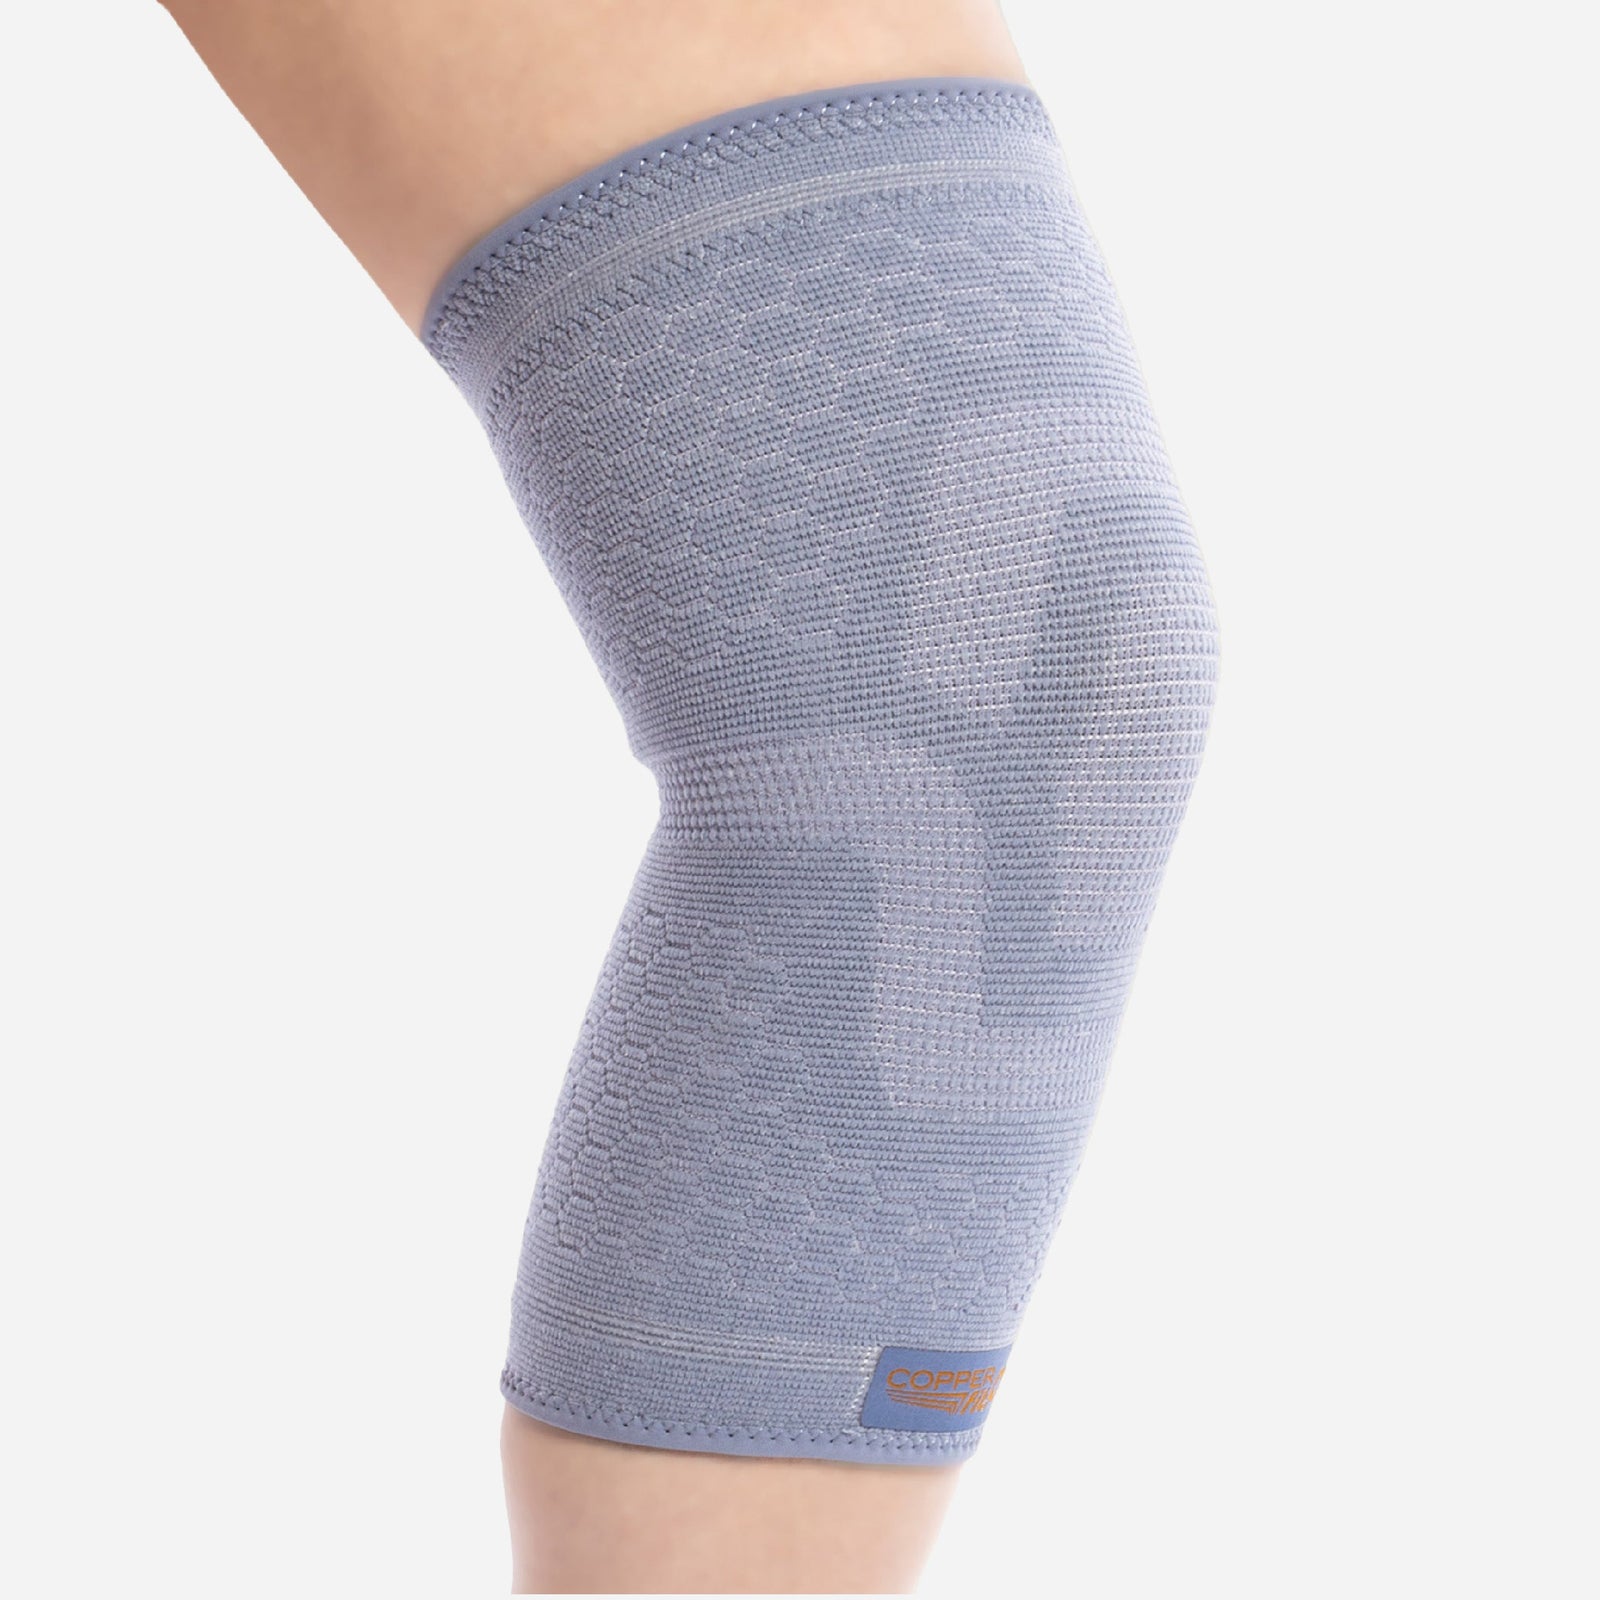 Copper Joe Knee Compression Sleeve- 1 Pair, Small - Pay Less Super Markets